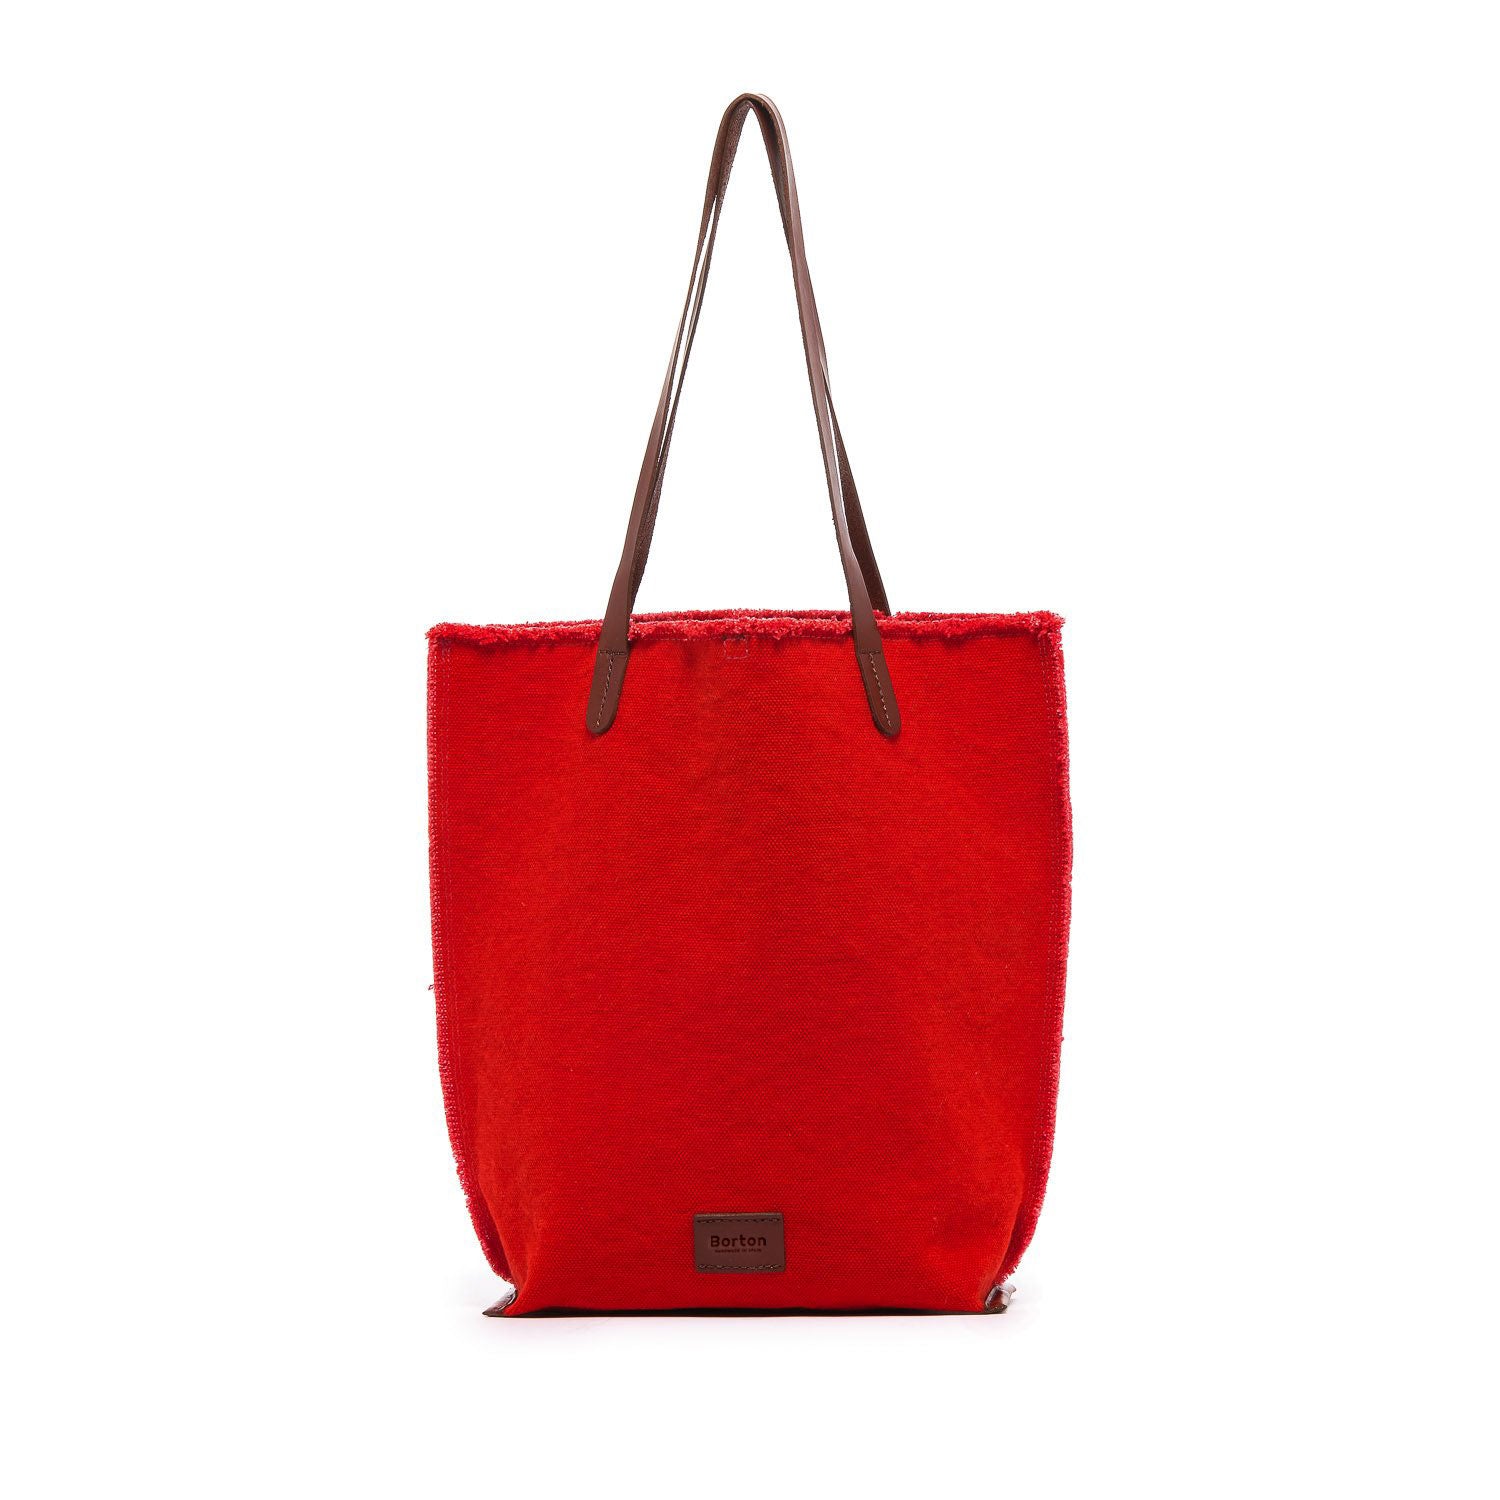 Mery Tote Bag Red Canvas & Tan Leather